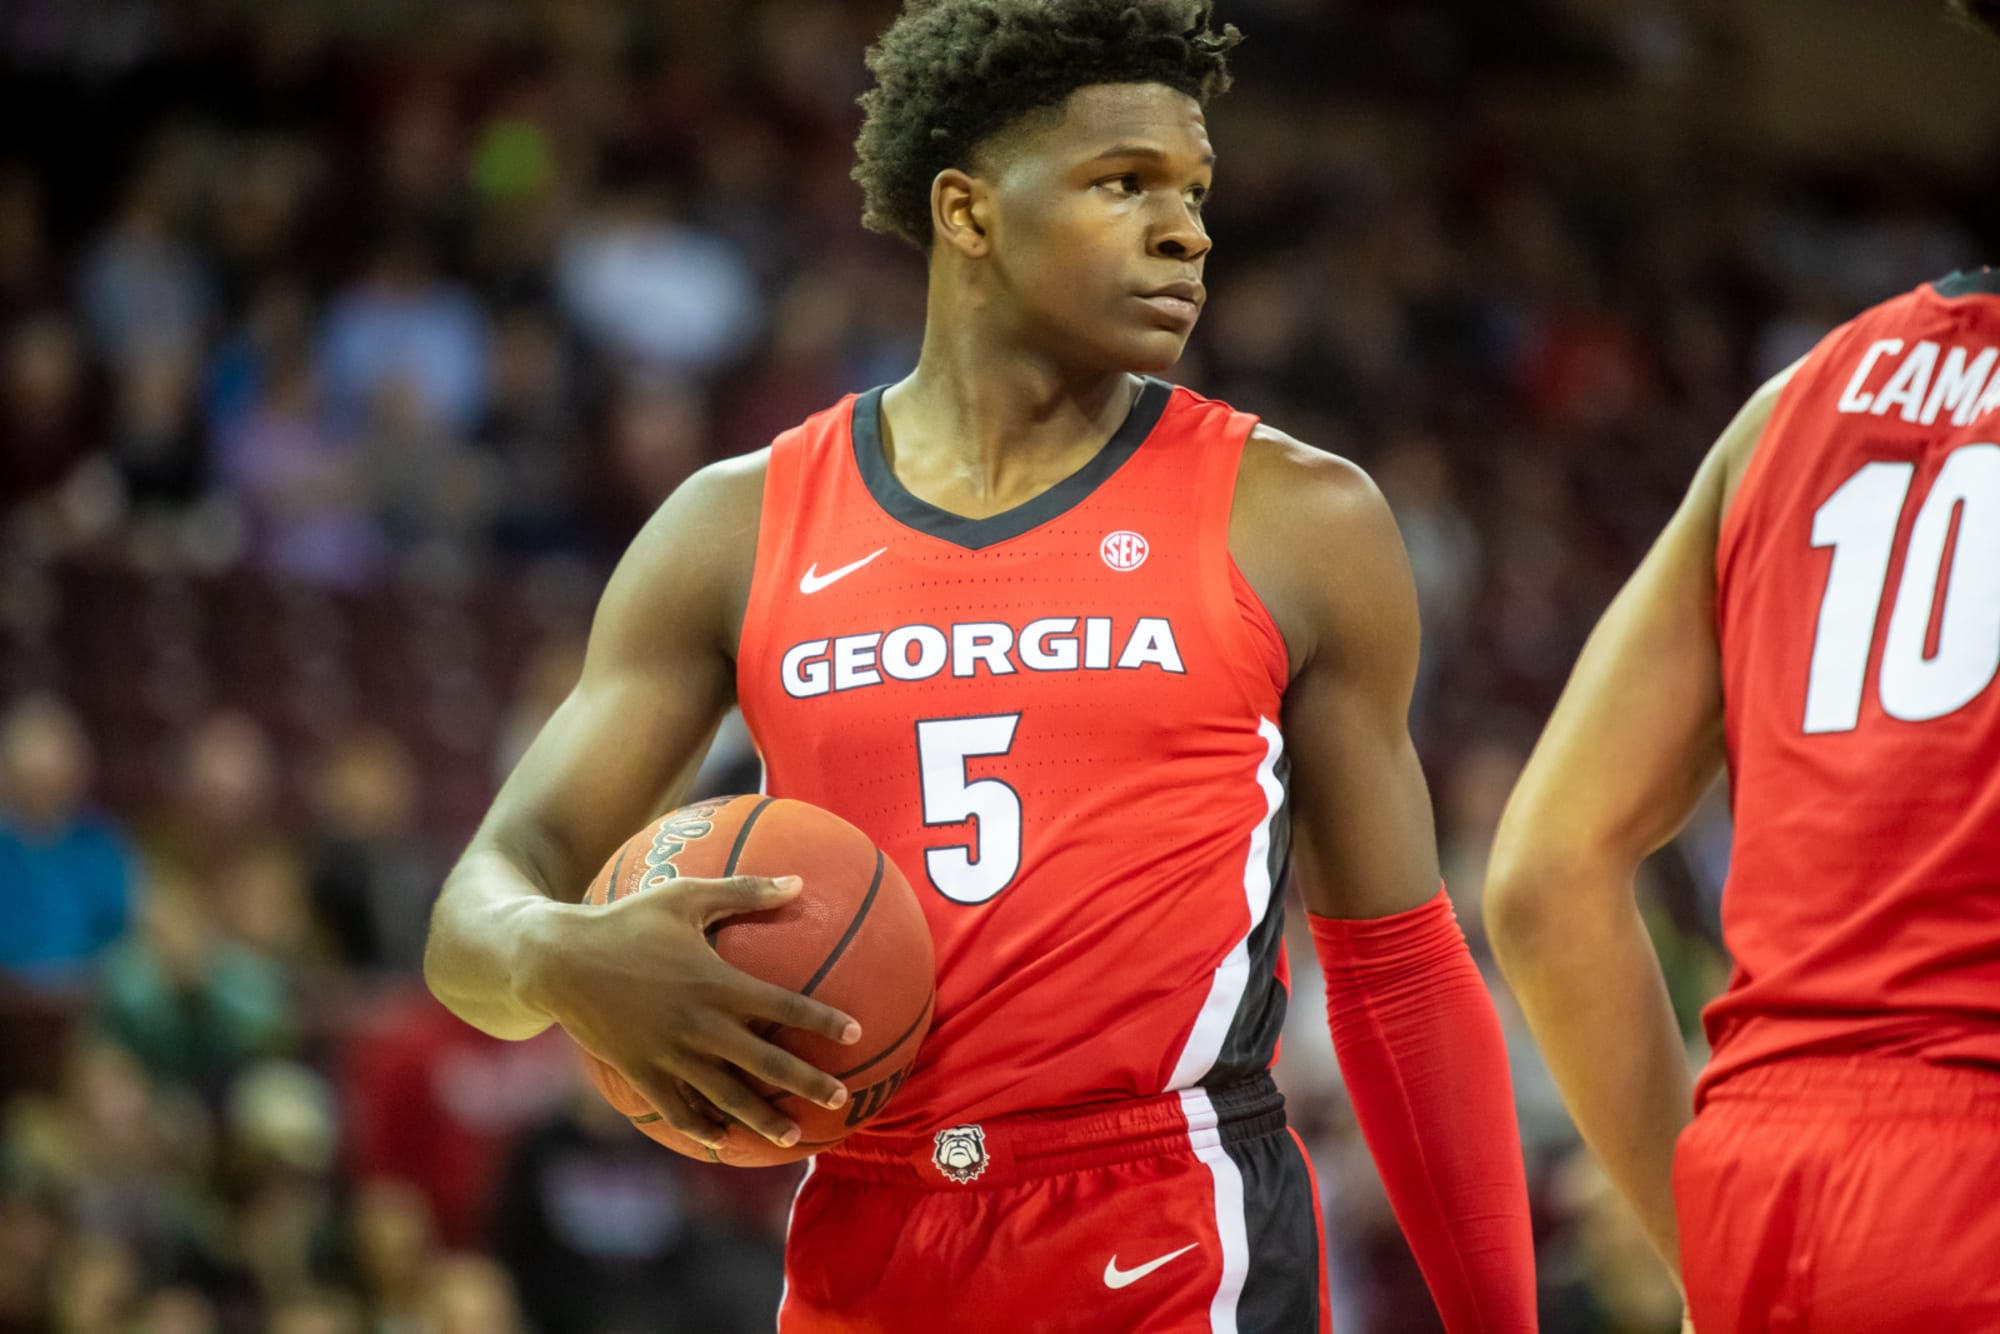 Warriors: 2020 NBA Draft prospect Obi Toppin wants to play for the Dubs